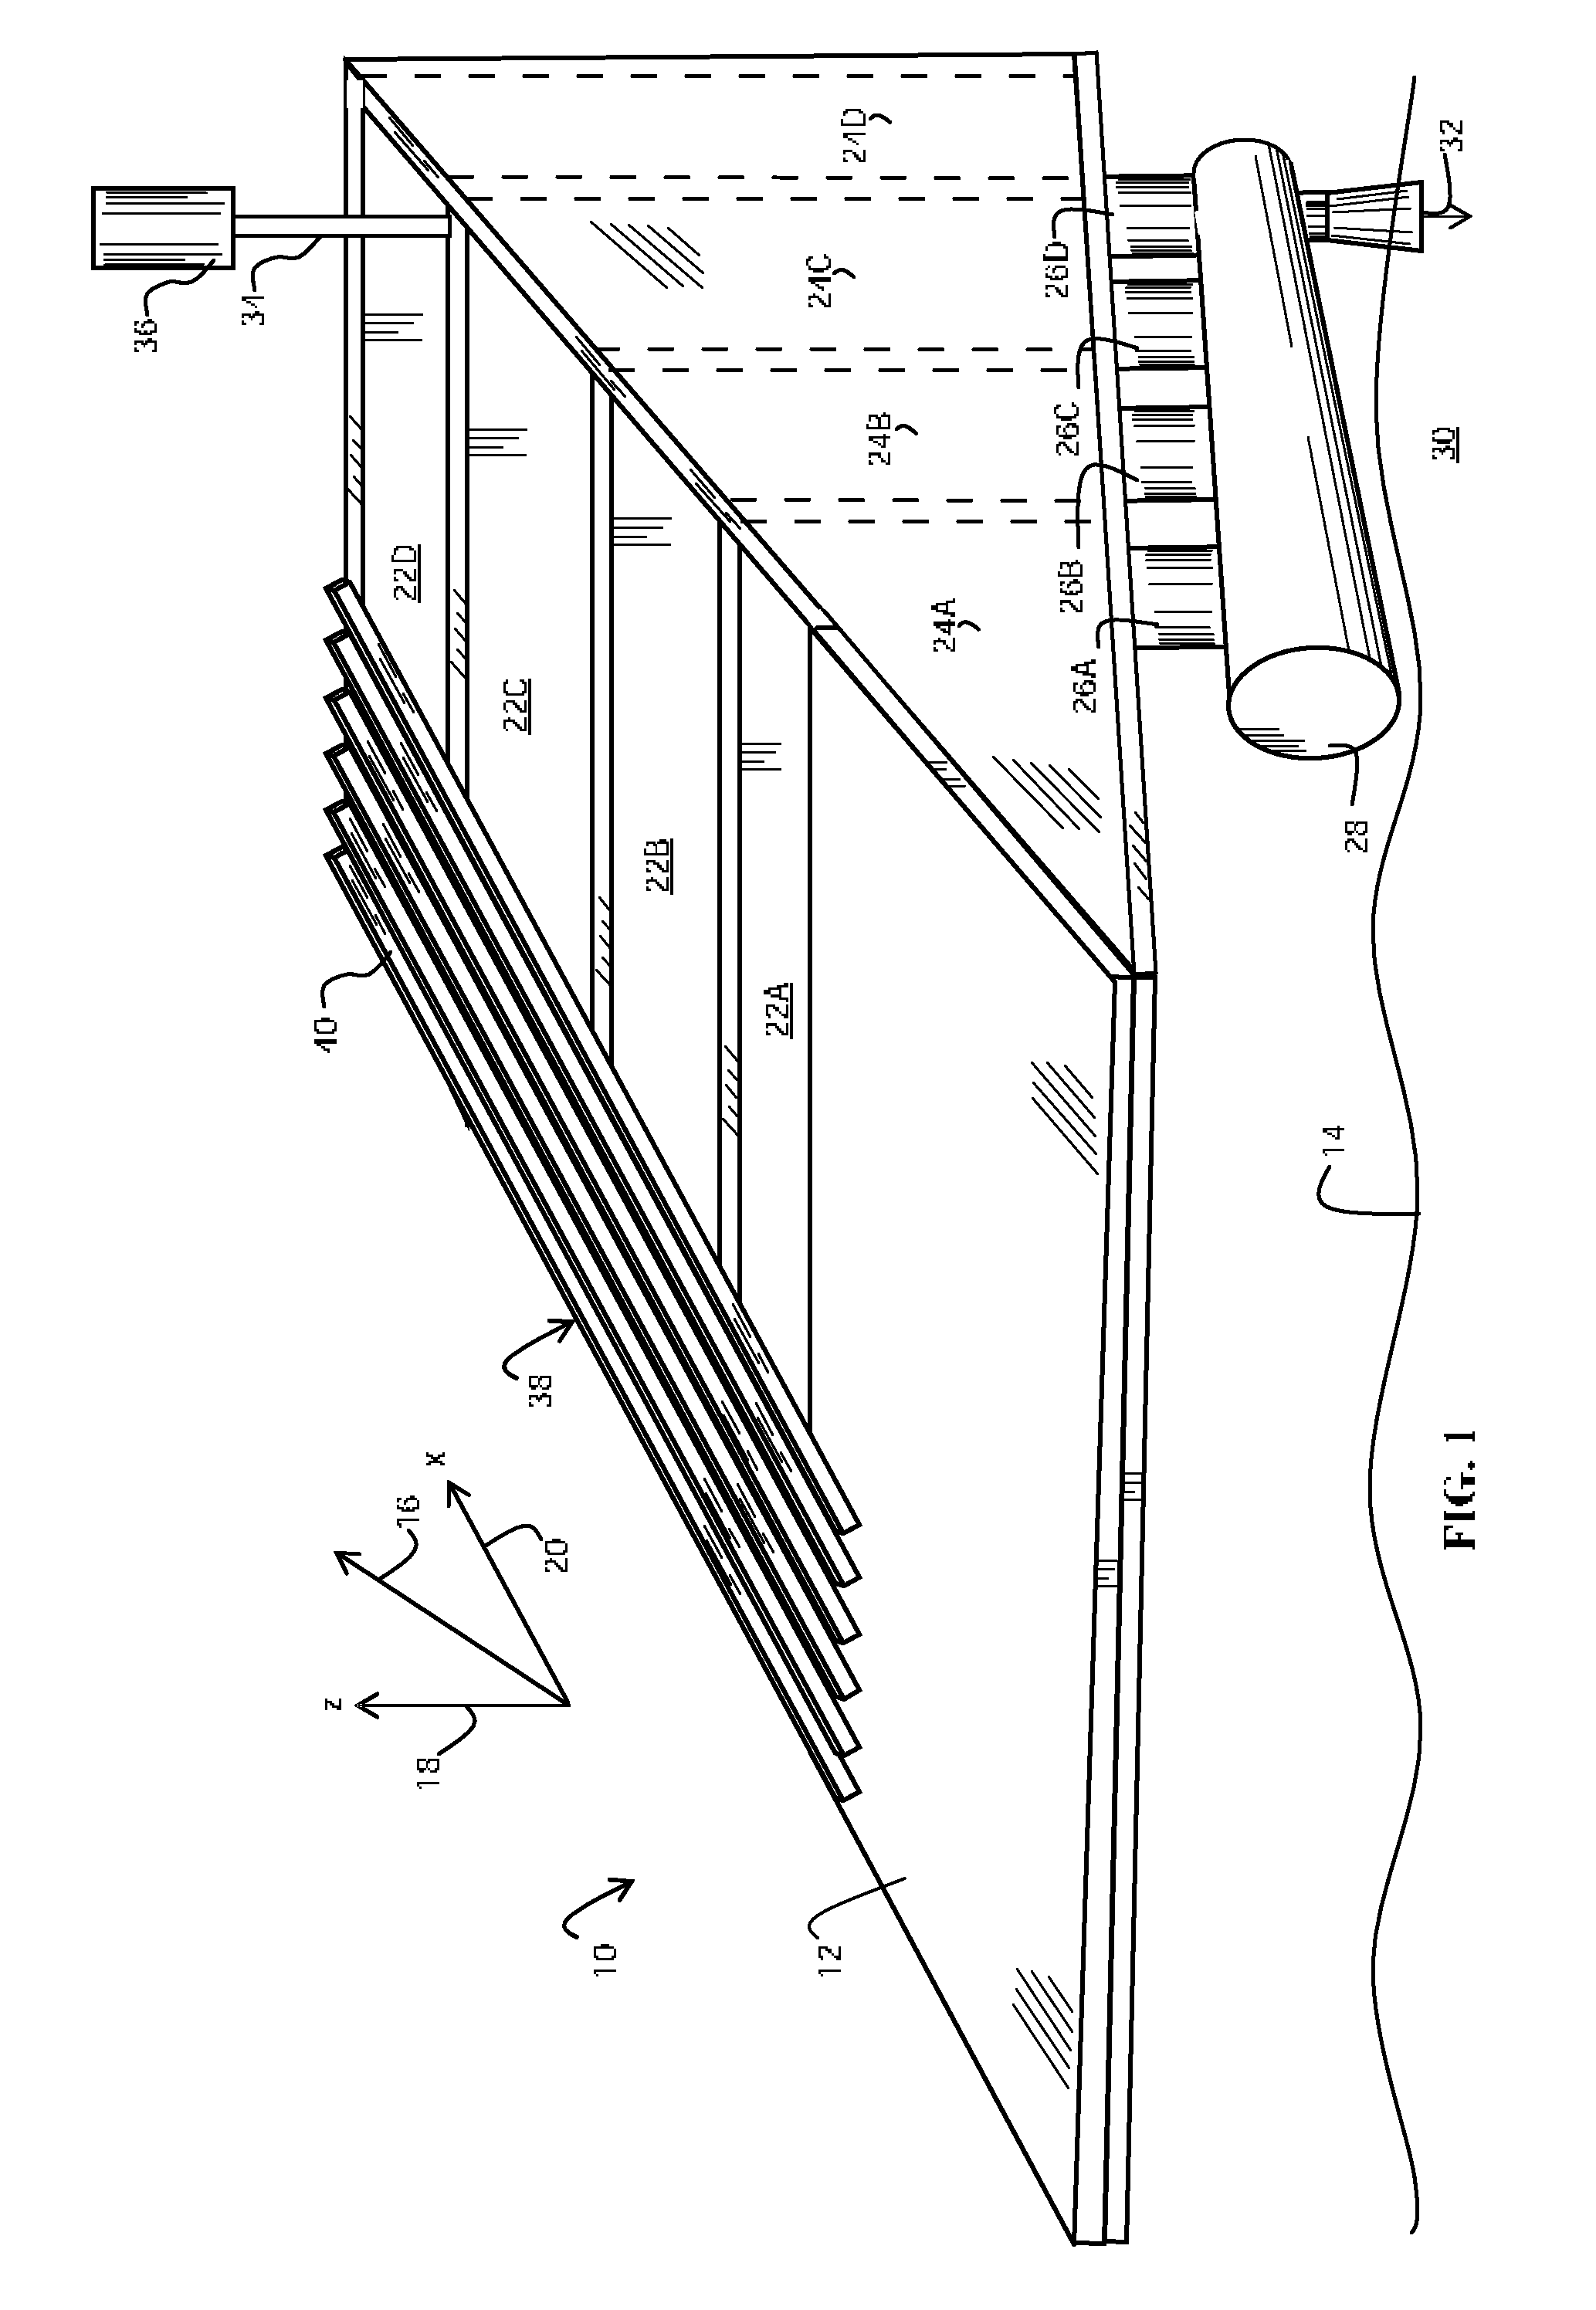 Flow power converter apparatus employing a flow-controlled duct to capture flow energy